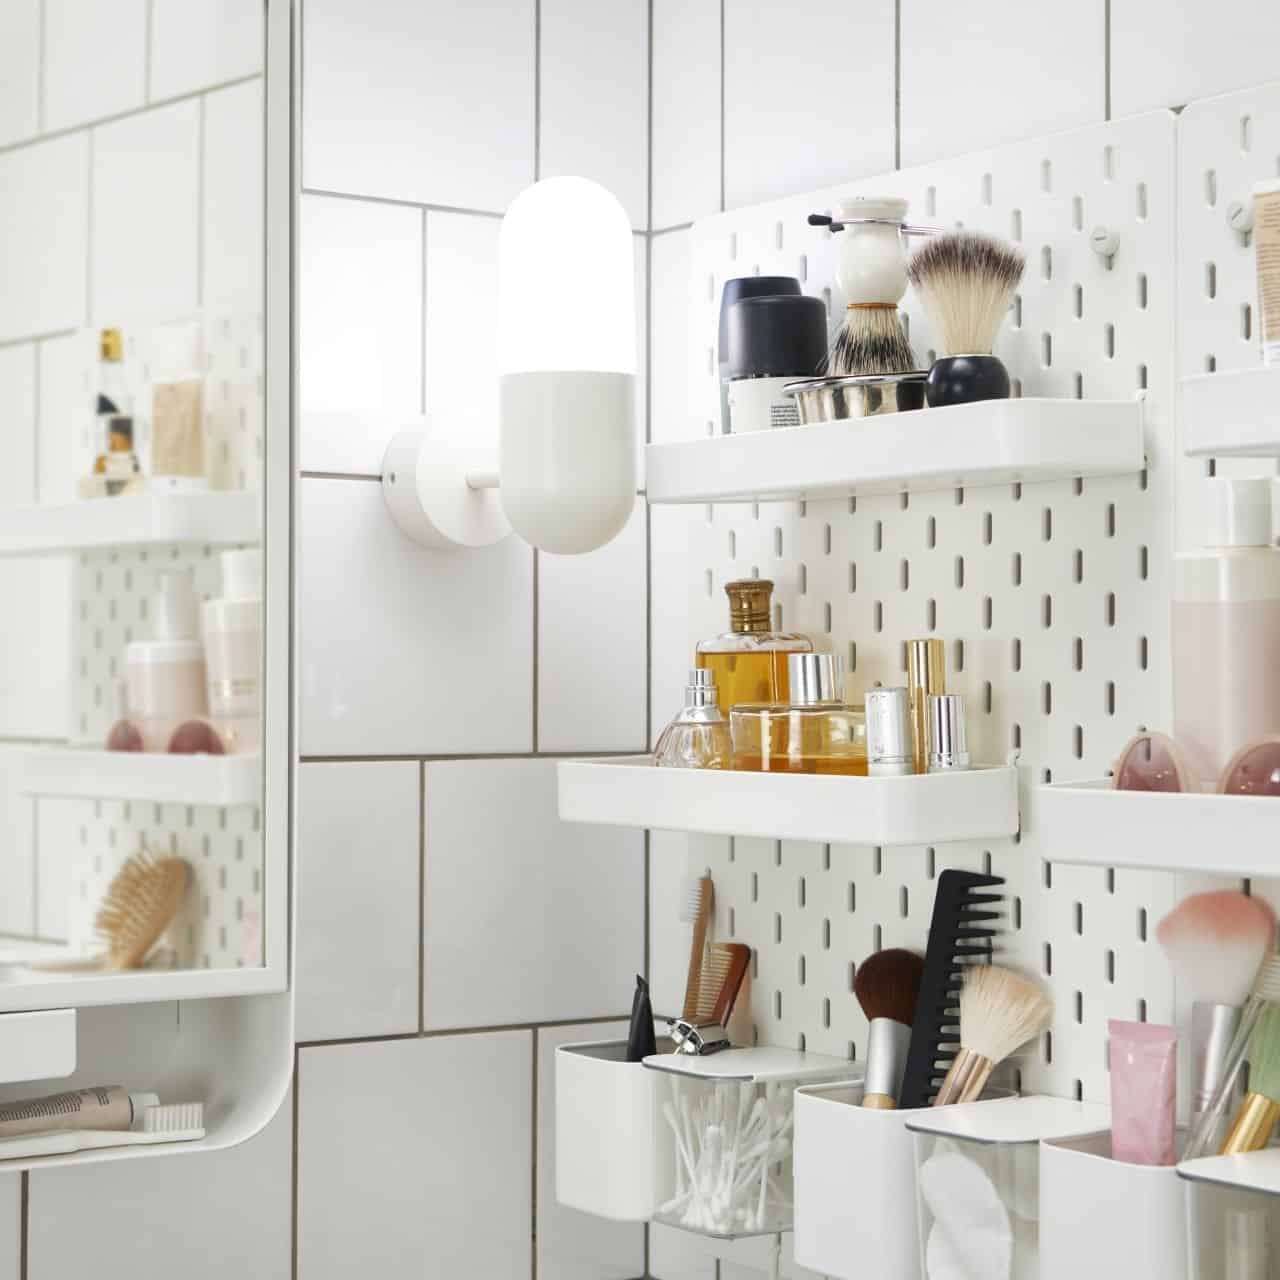 18 Tricky Small Bathroom Storage Ideas To Make A Cool Space